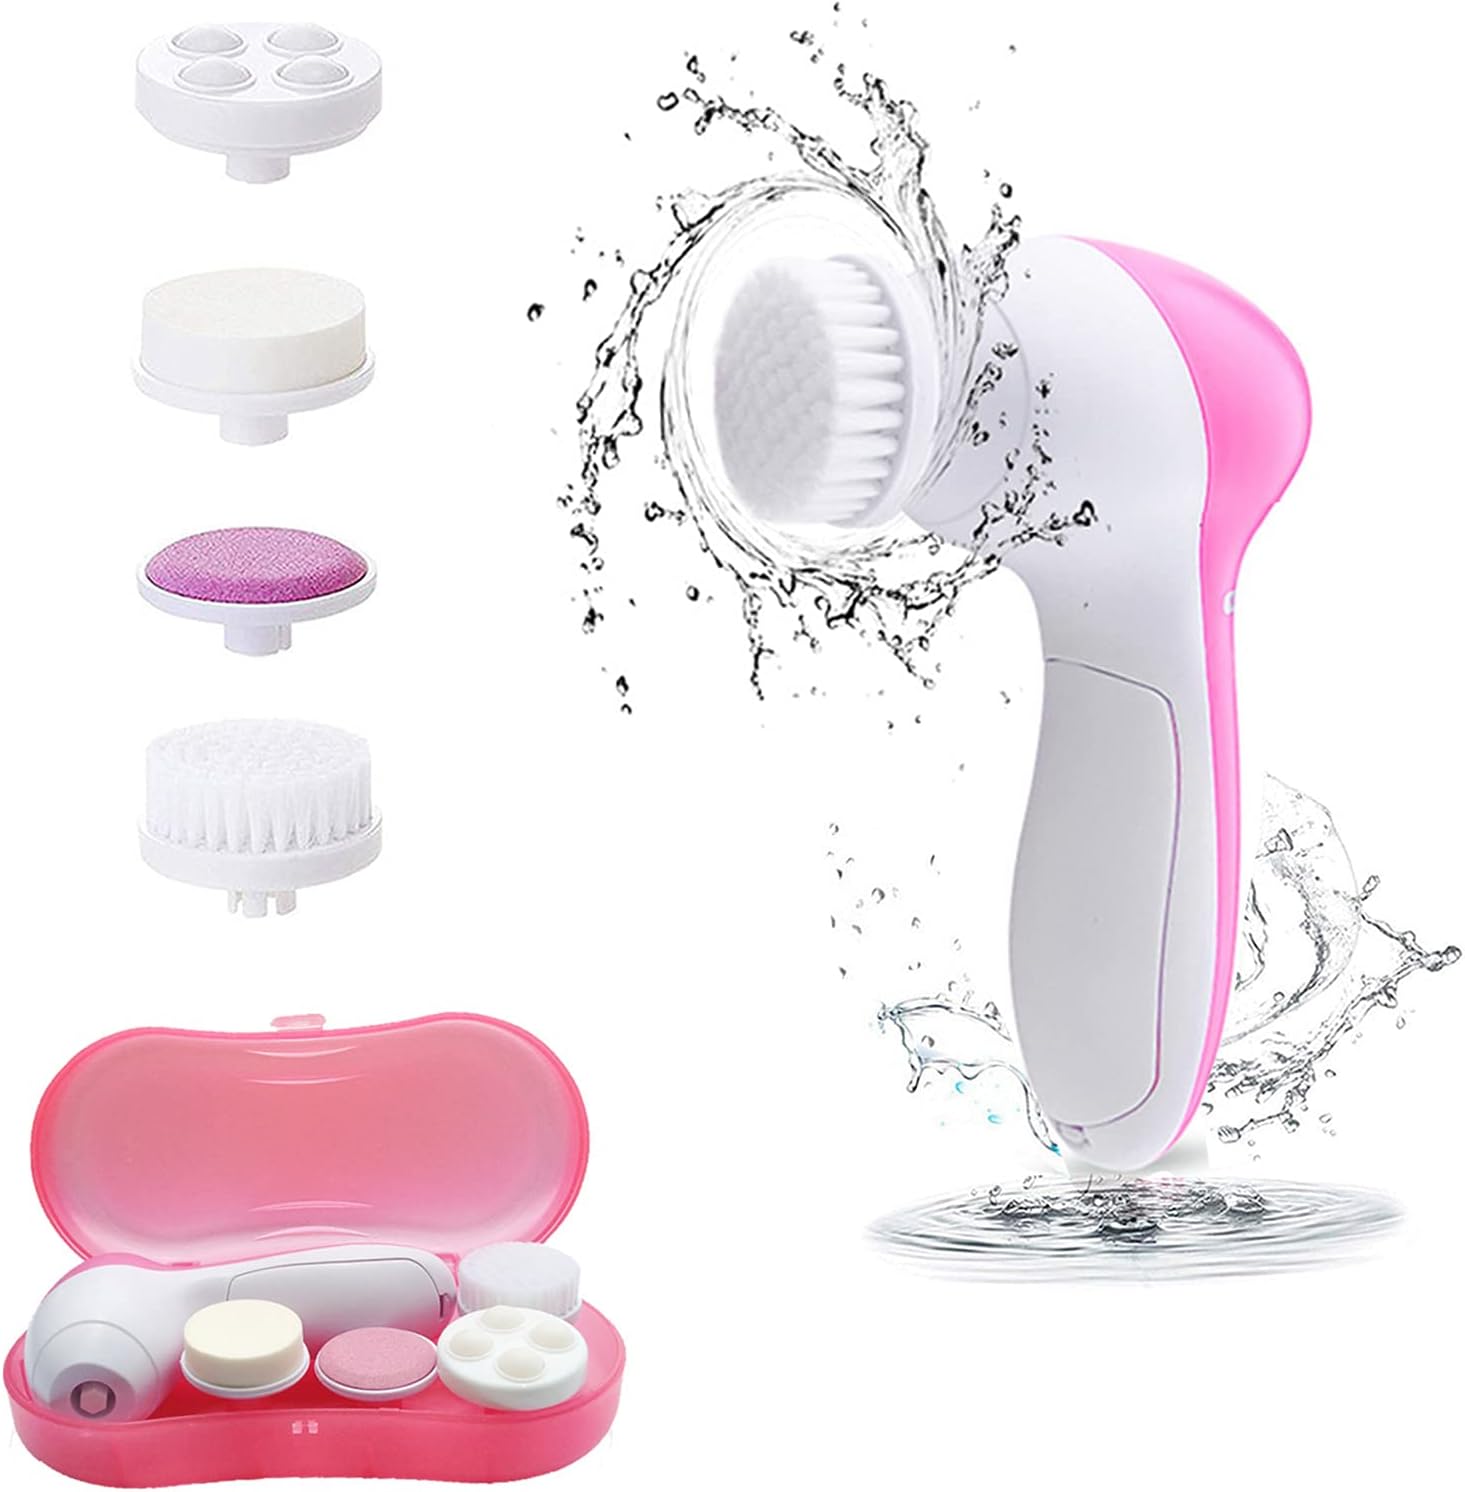 Facial Cleansing Brush Face Brush Electric Face Massager Facial Cleansing Spin Brush Set for Gentle Exfoliating,Removing Blackhead Gift Skincare for Teenage Girl(Pink1)